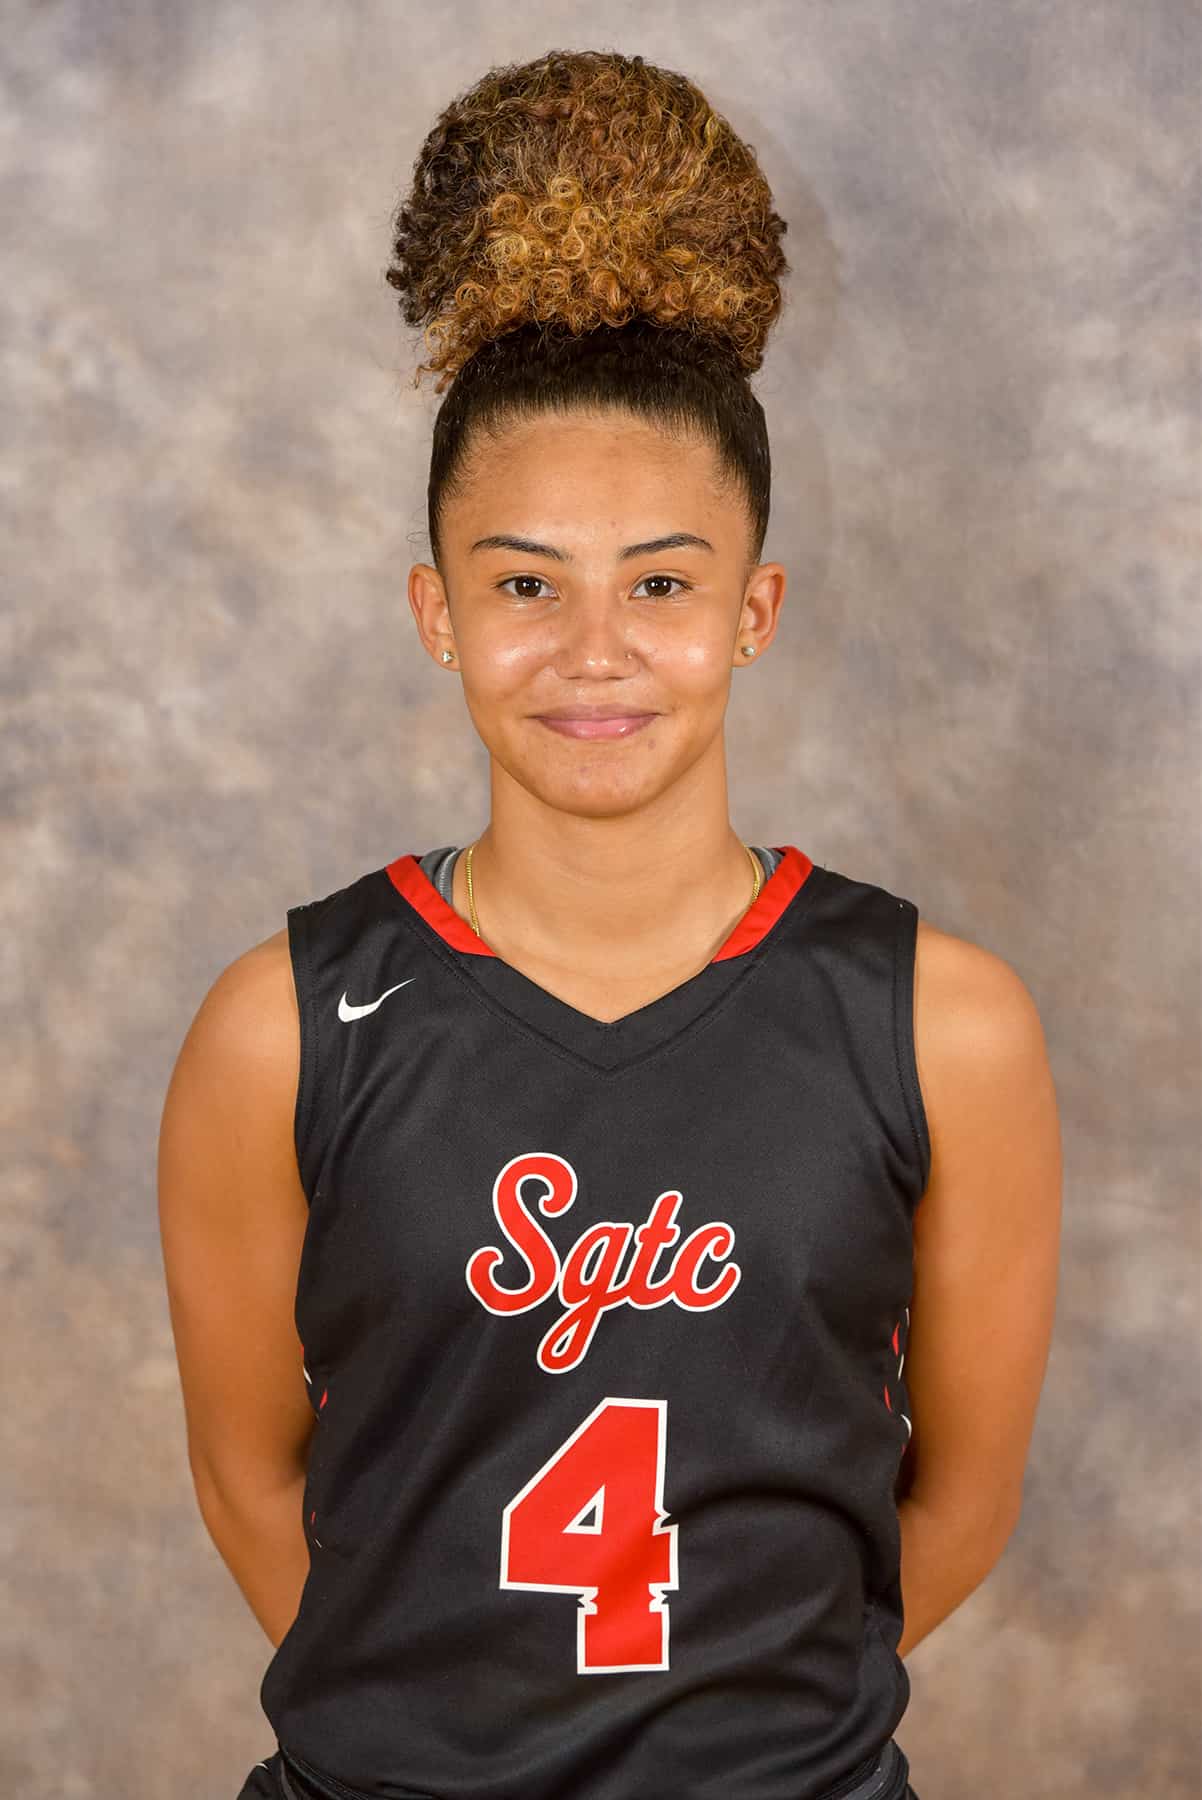 Alyssa Nieves, 4, was the leading scorer for the Lady Jets with 14 points in the game against East Georgia State College